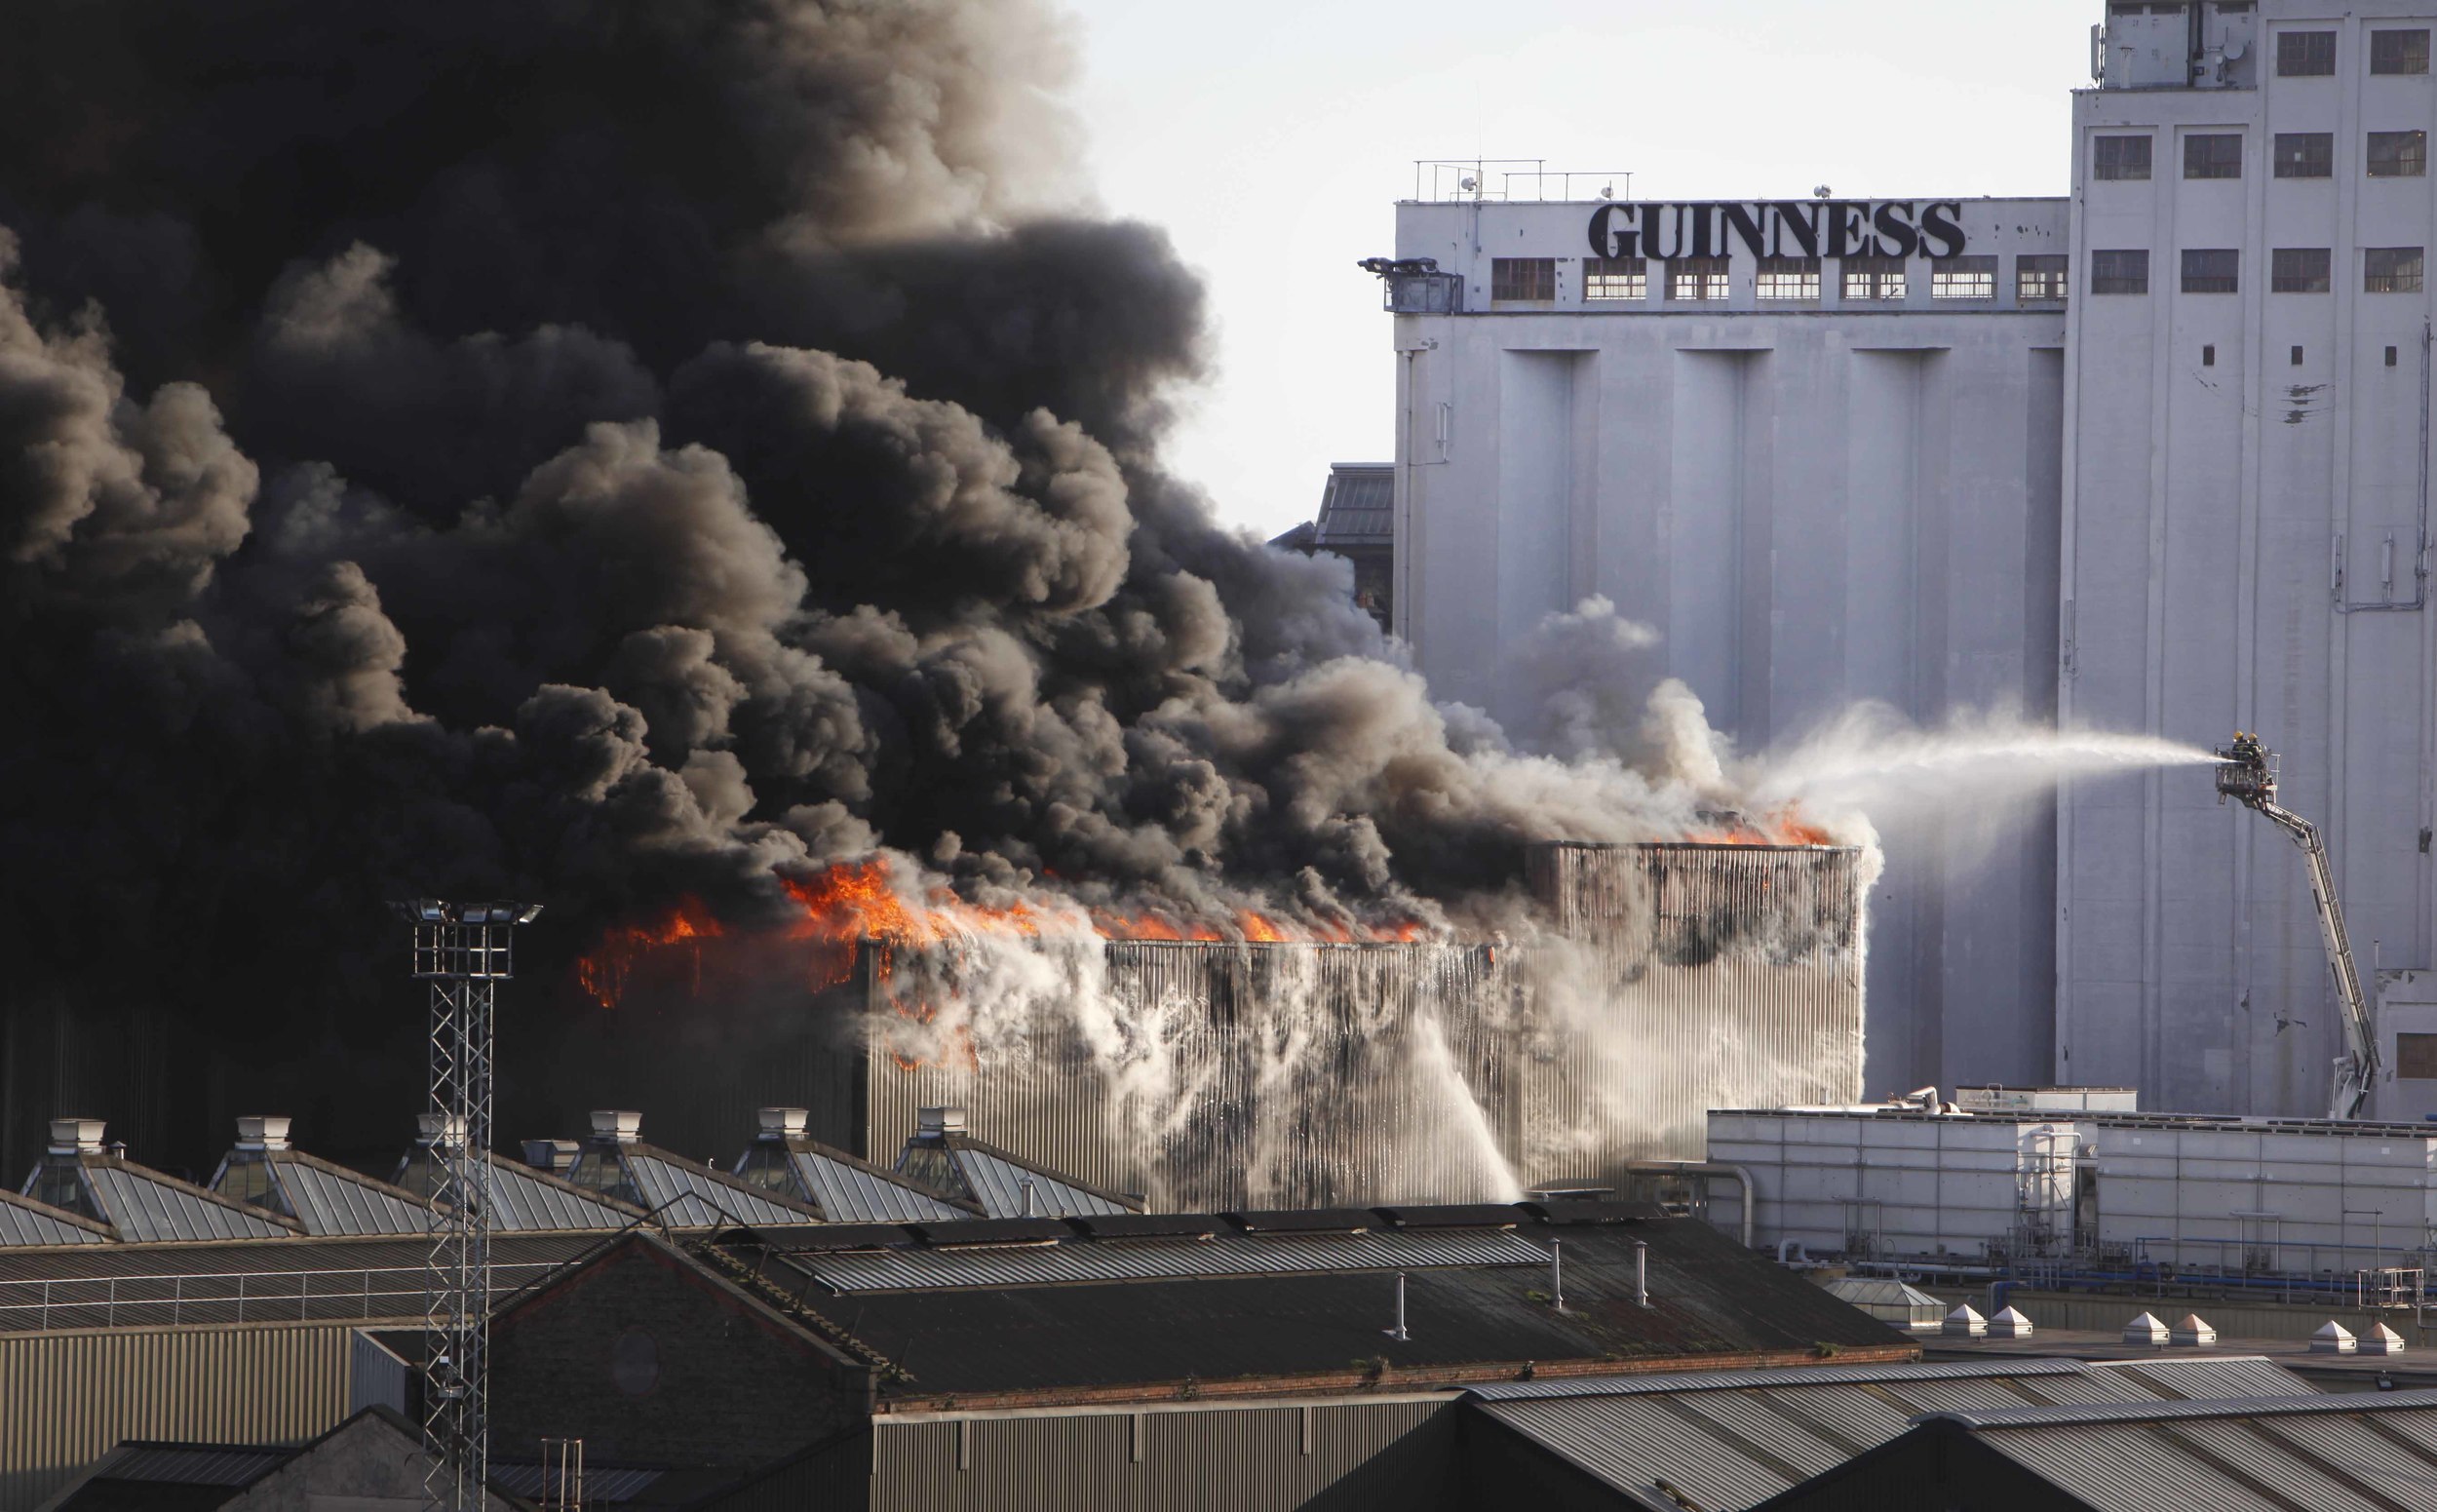  Fire engulfs the Guinness factory in Dublin 